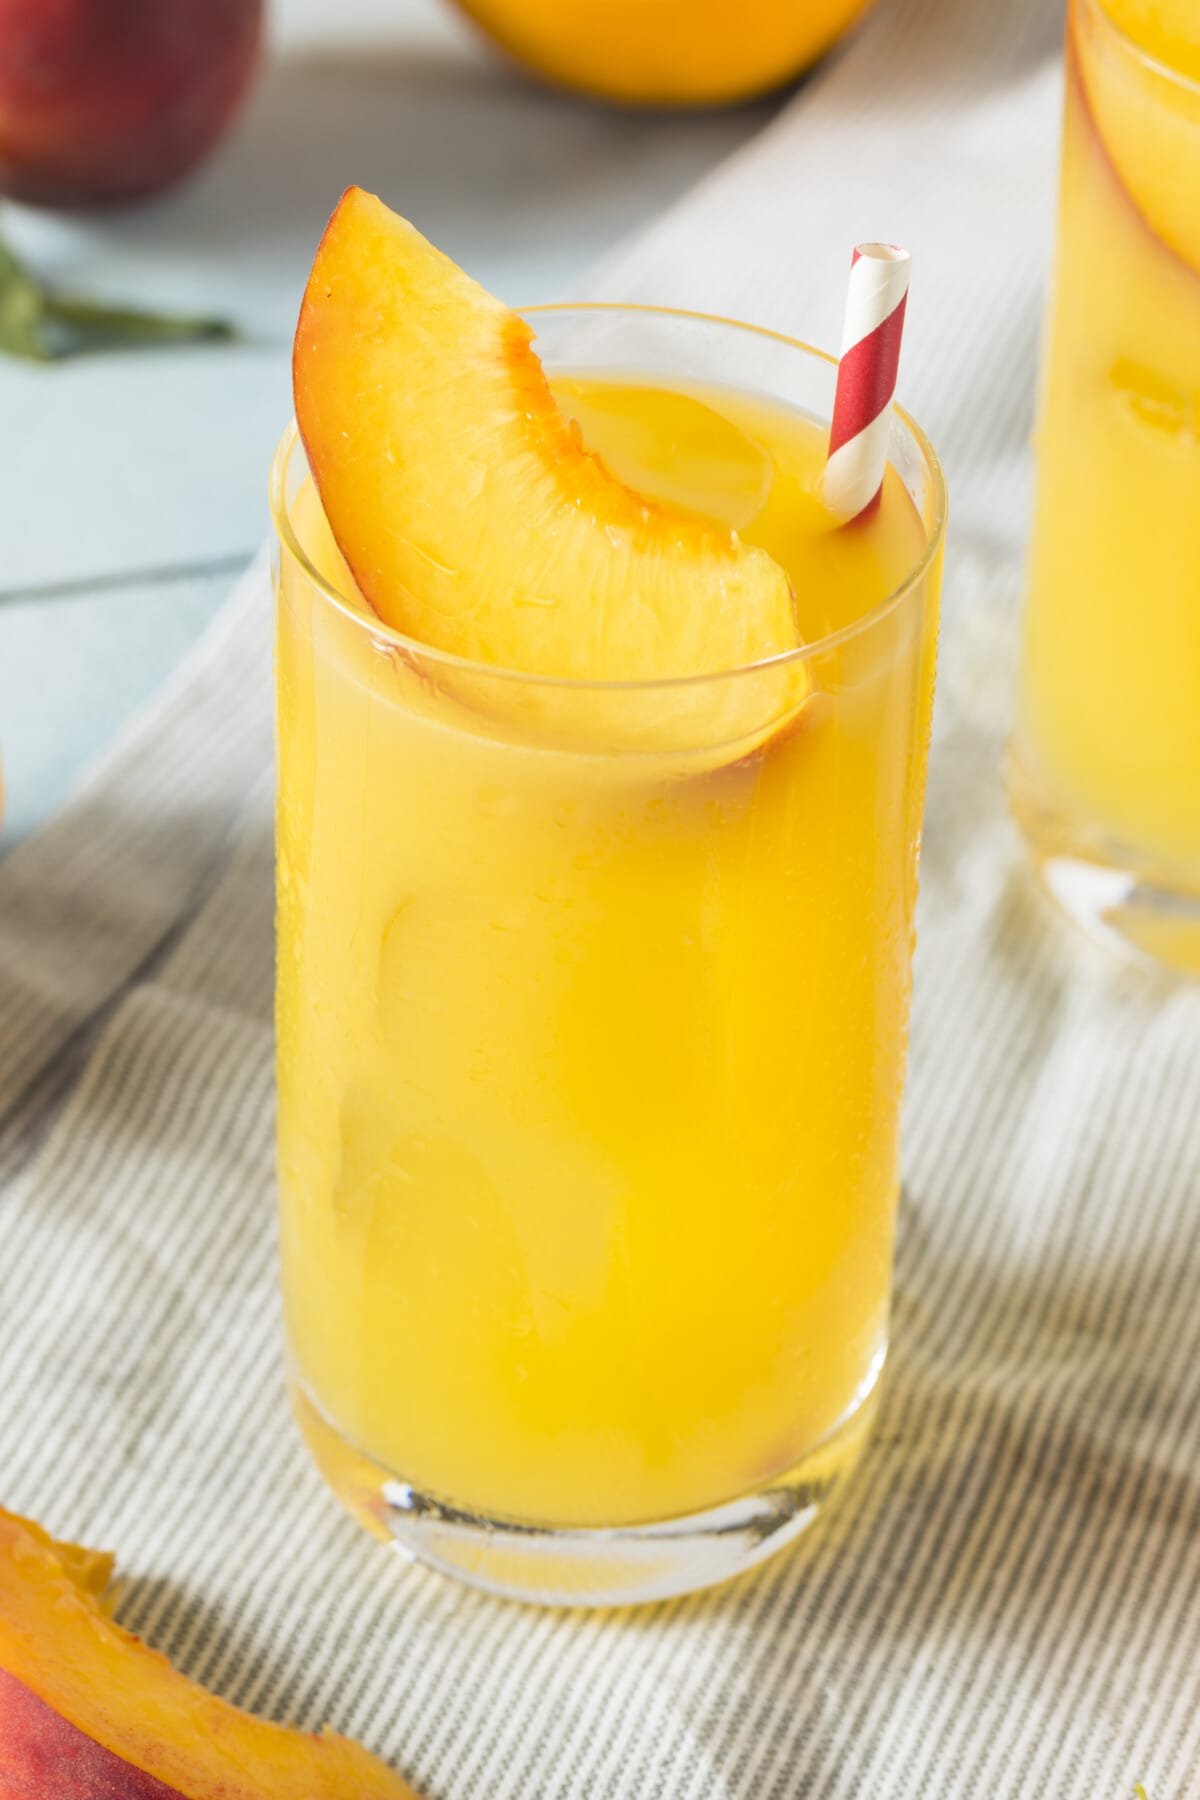 Fuzzy Navel Drink with a sliced peach